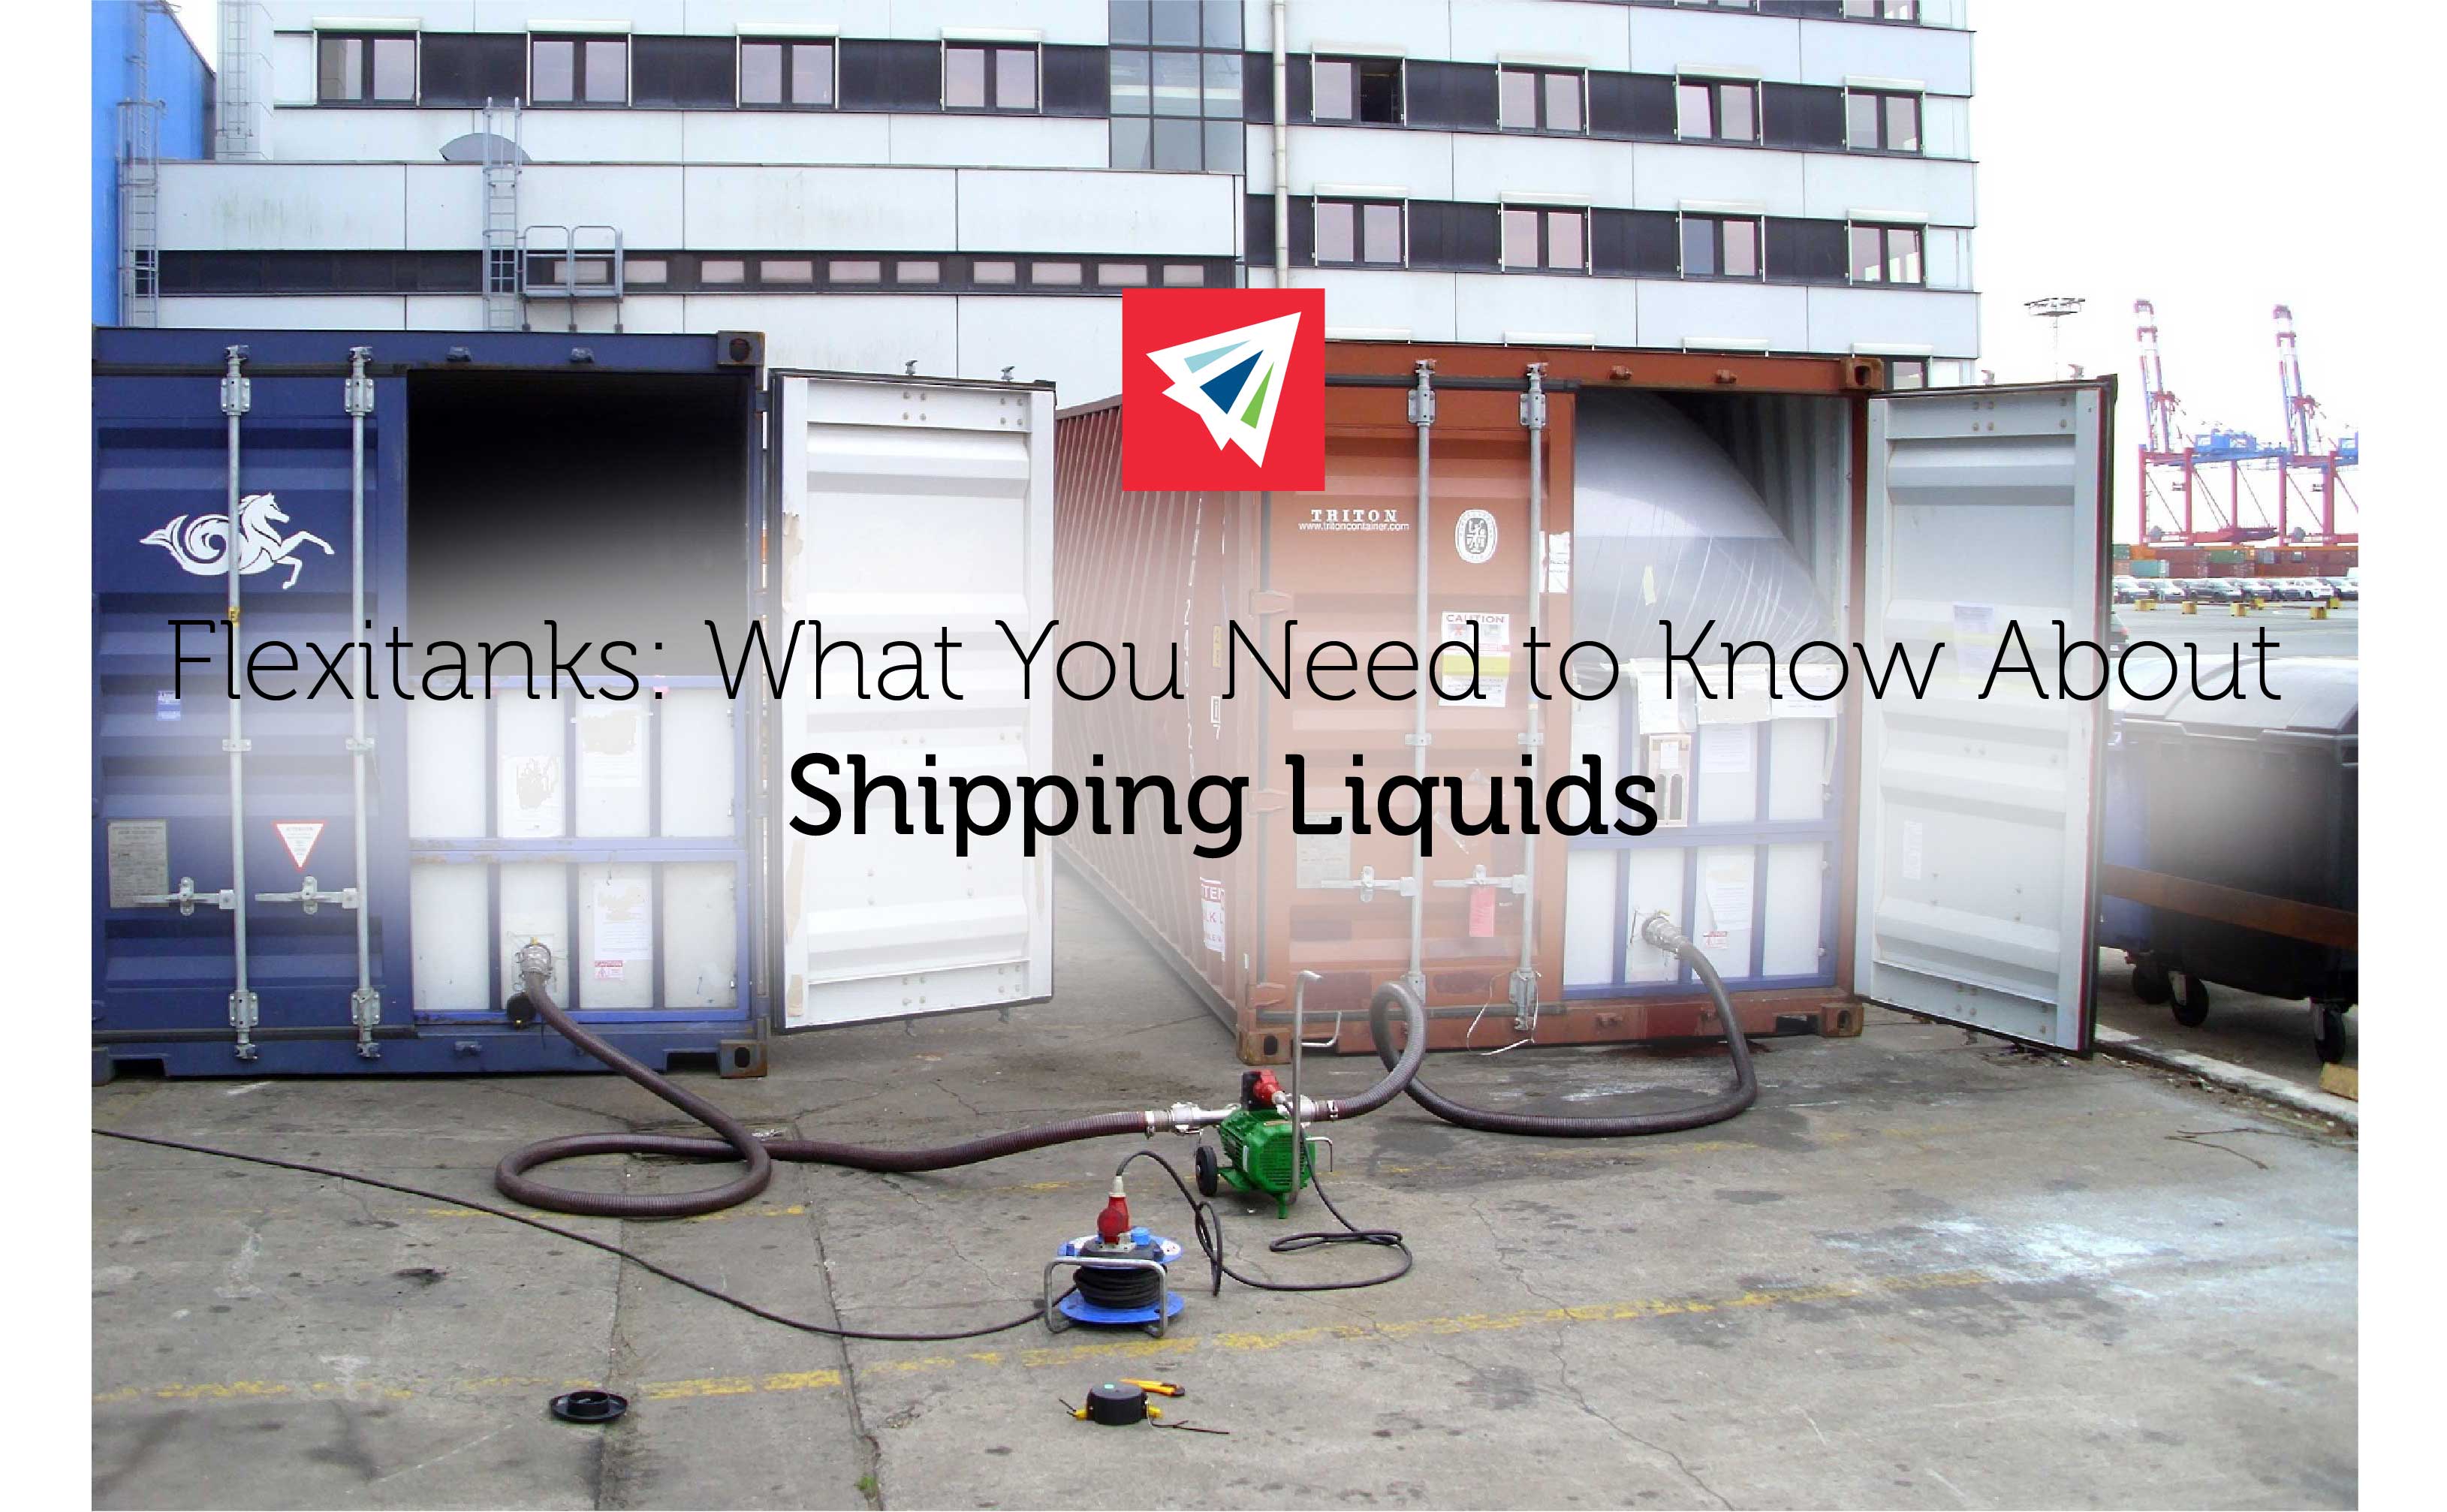 Flexitanks - What You Need To Know About Transporting Liquids